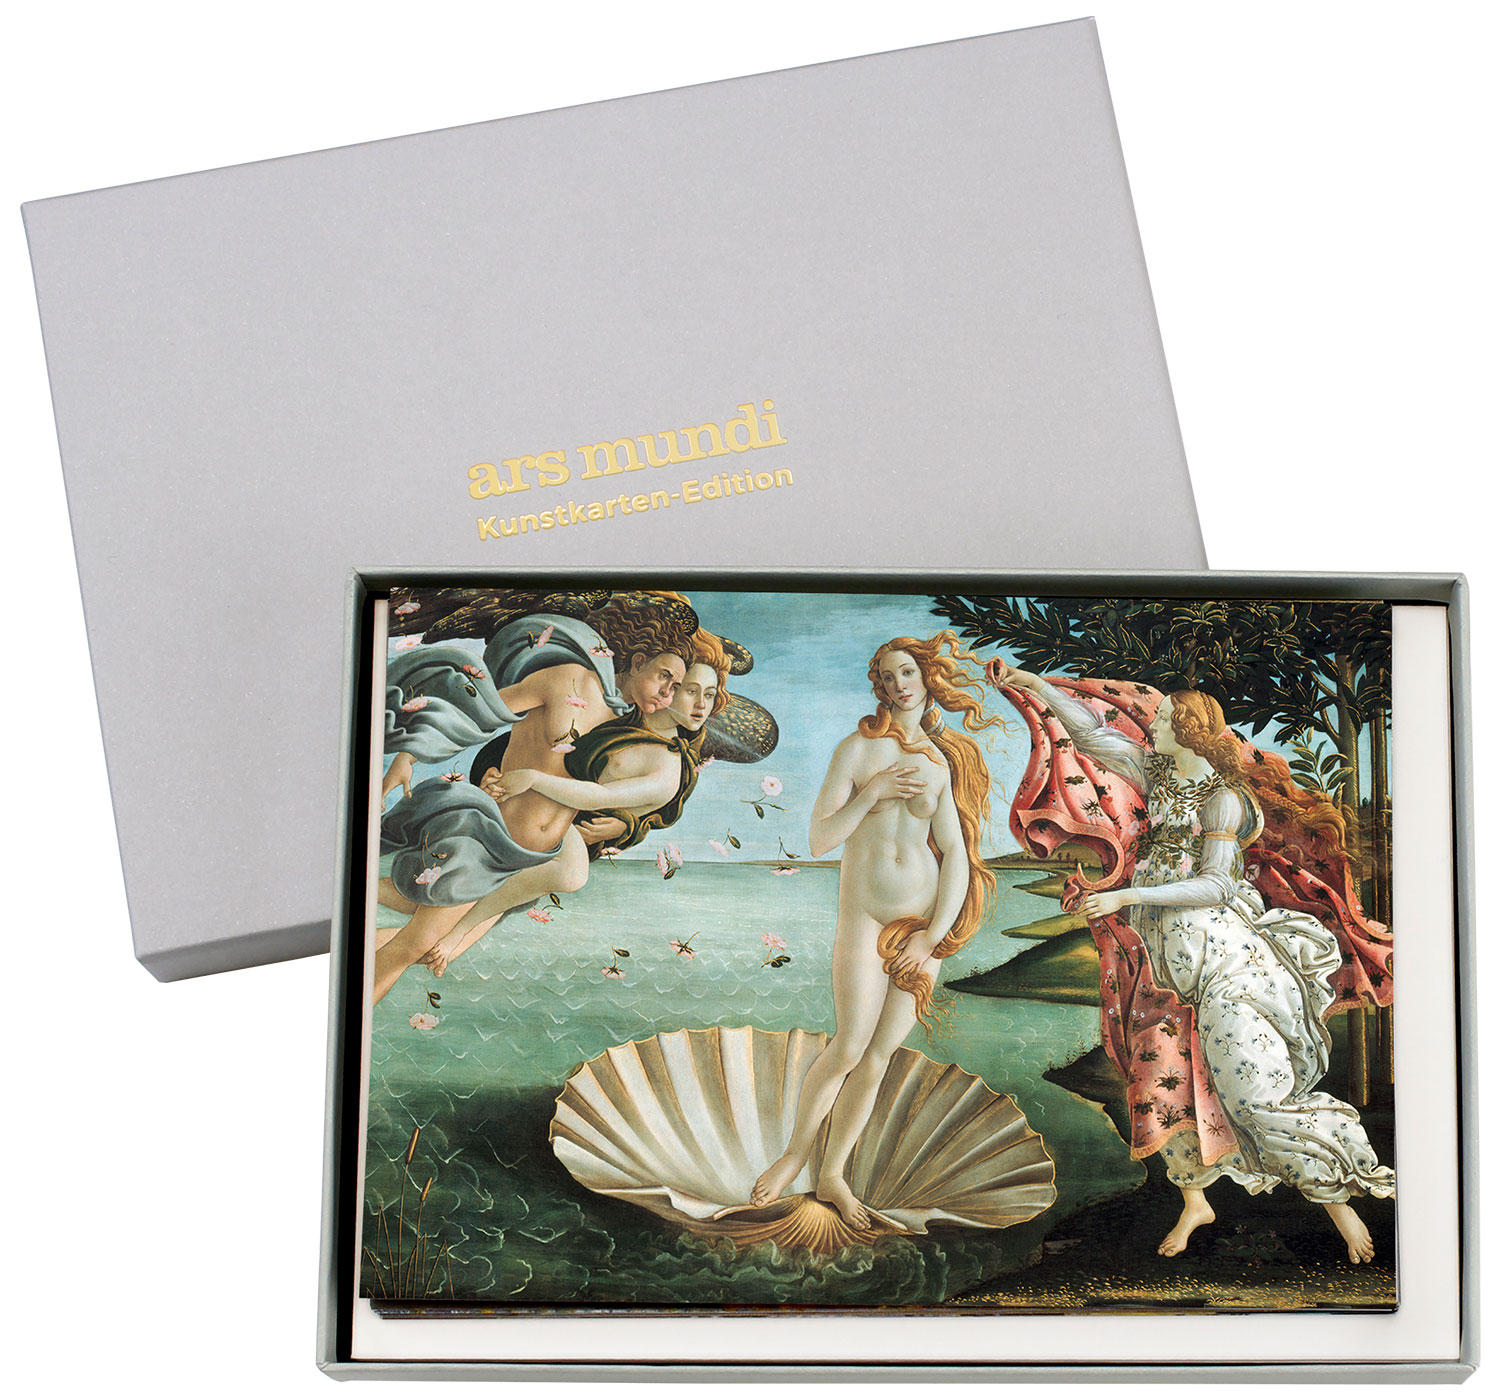 Art cards edition "Masterpieces", set of 9